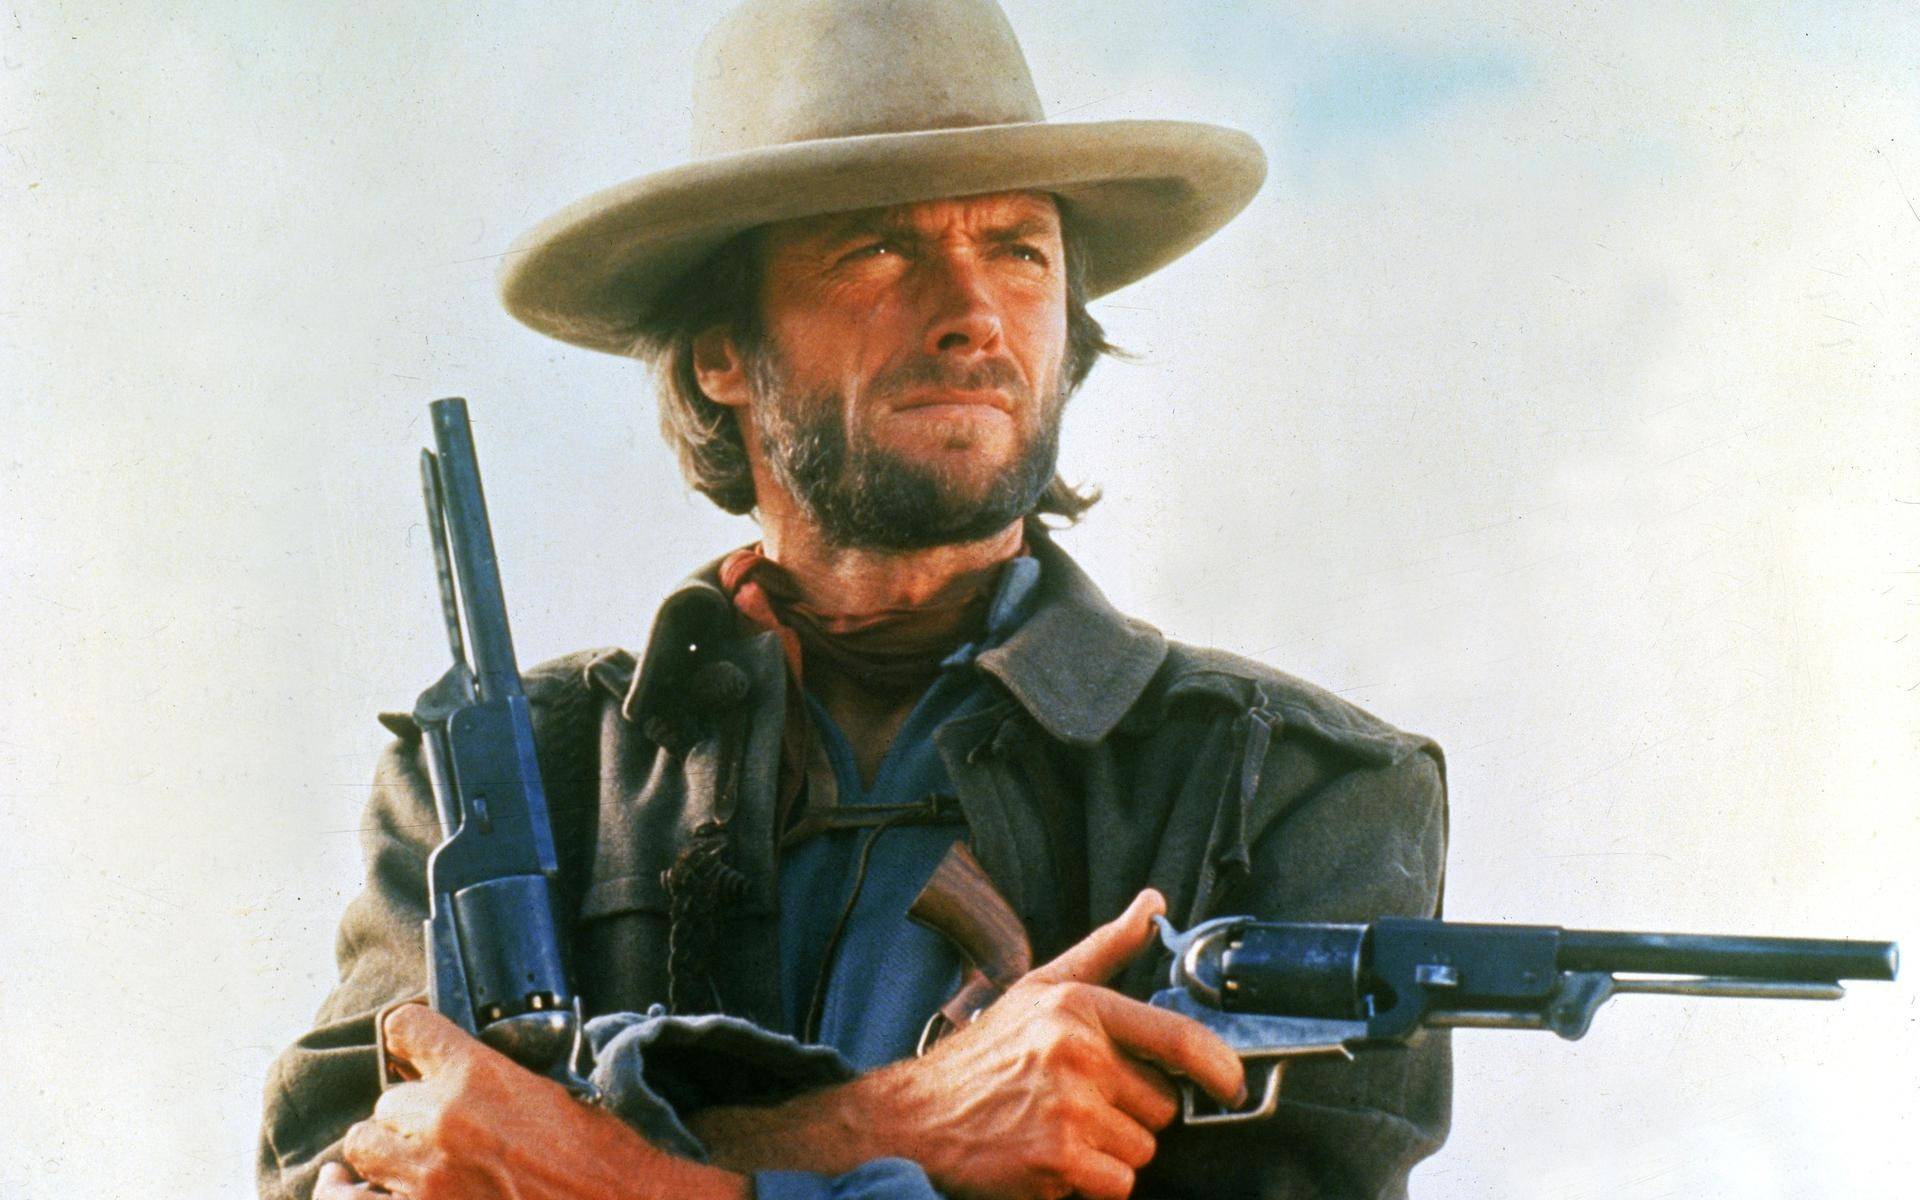 wallpaper for The Outlaw Josey Wales The Outlaw Josey Wales 1920x1200